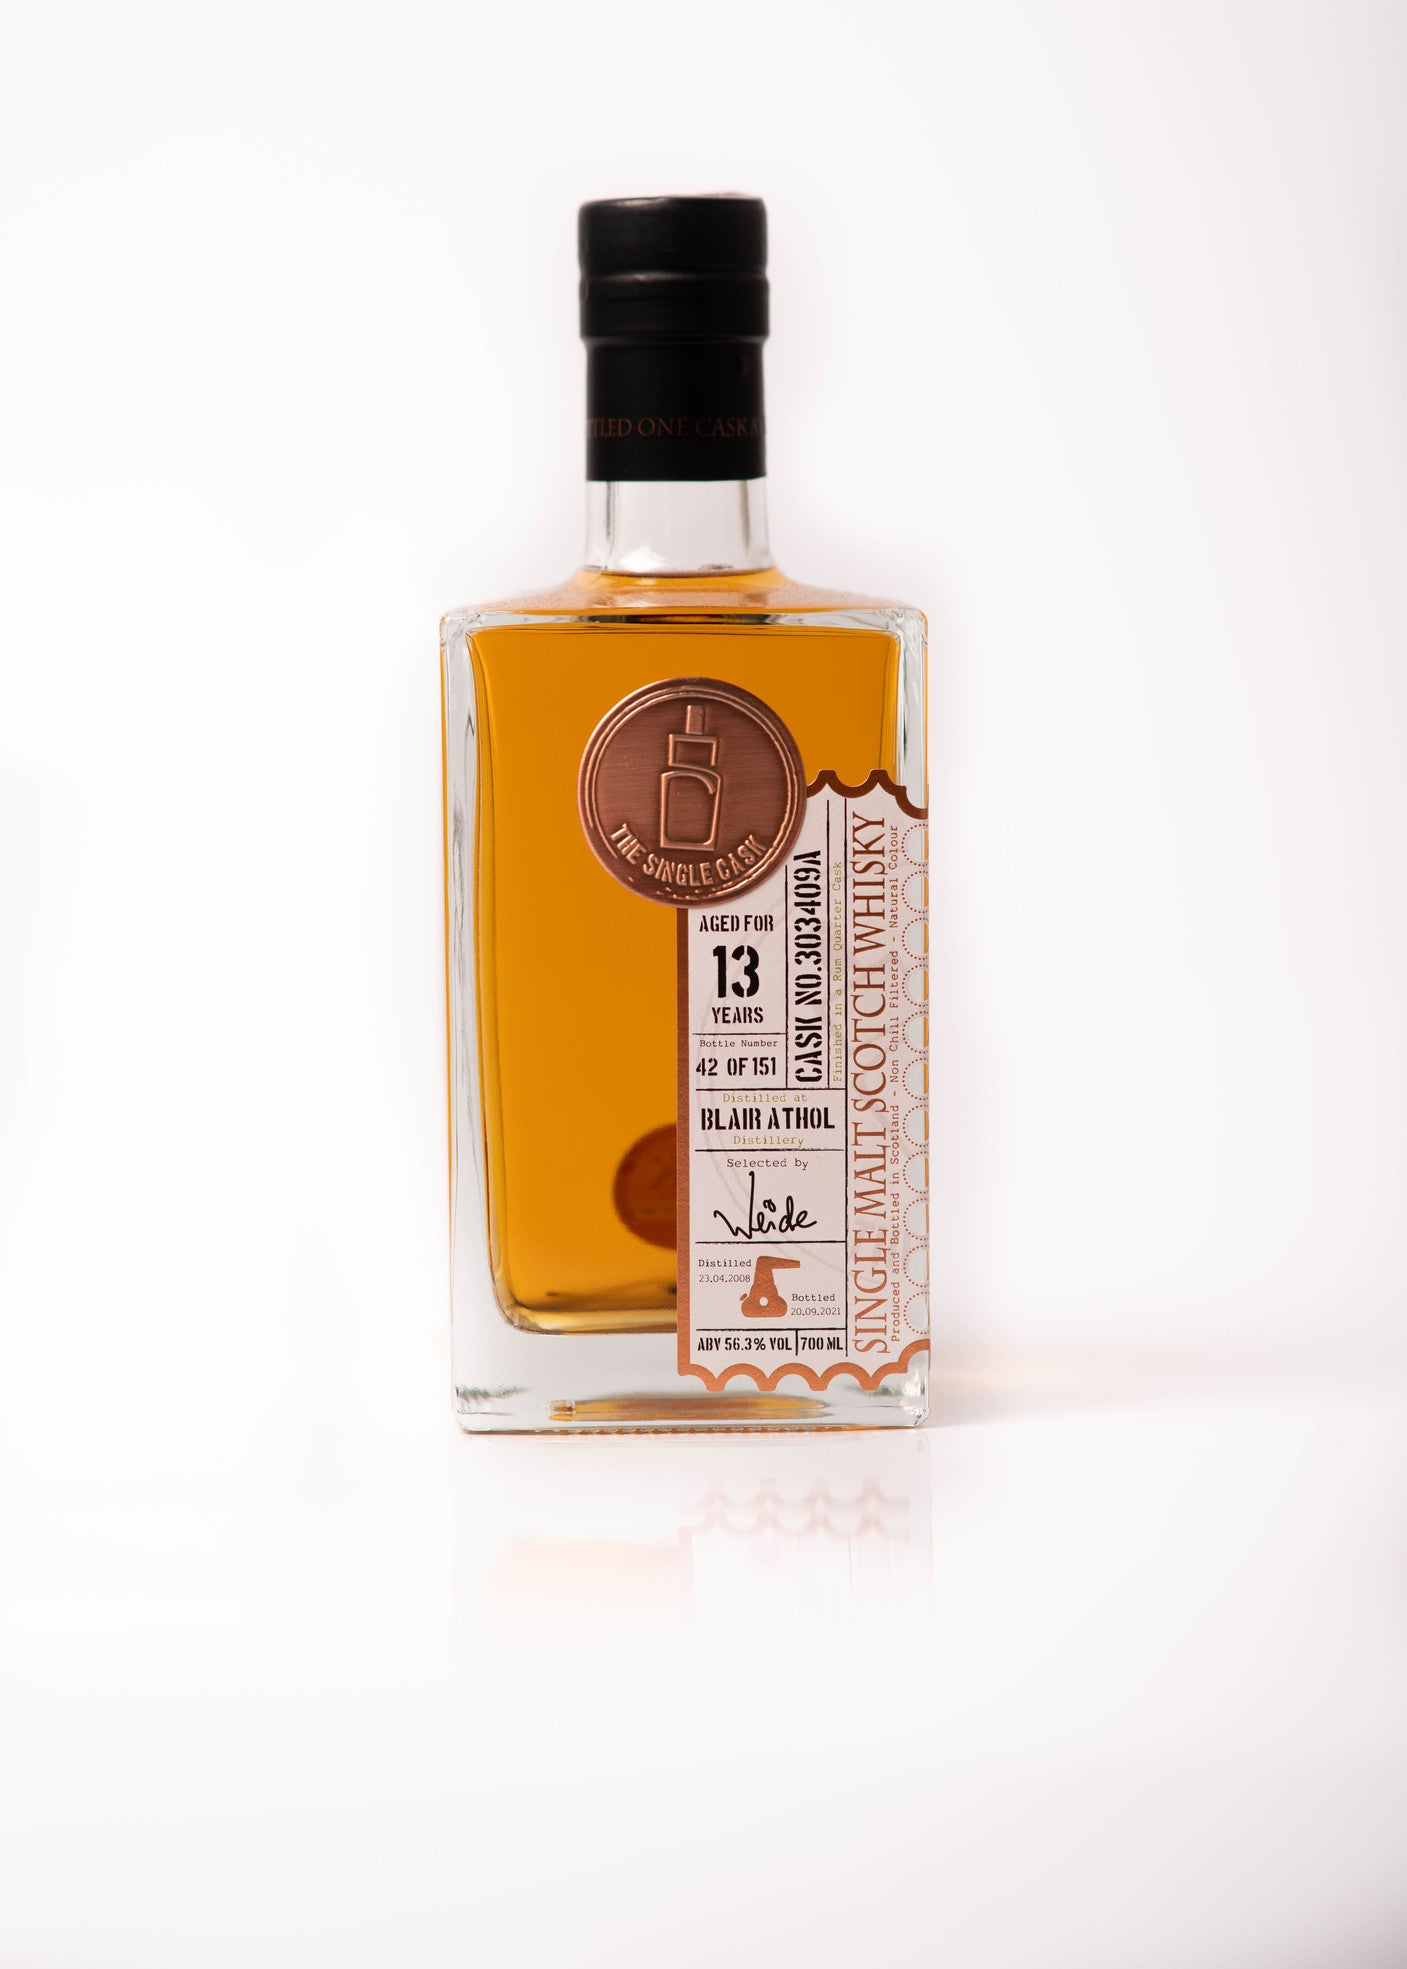 Blair Athol 13 years old single cask scotch whisky from The Single Cask